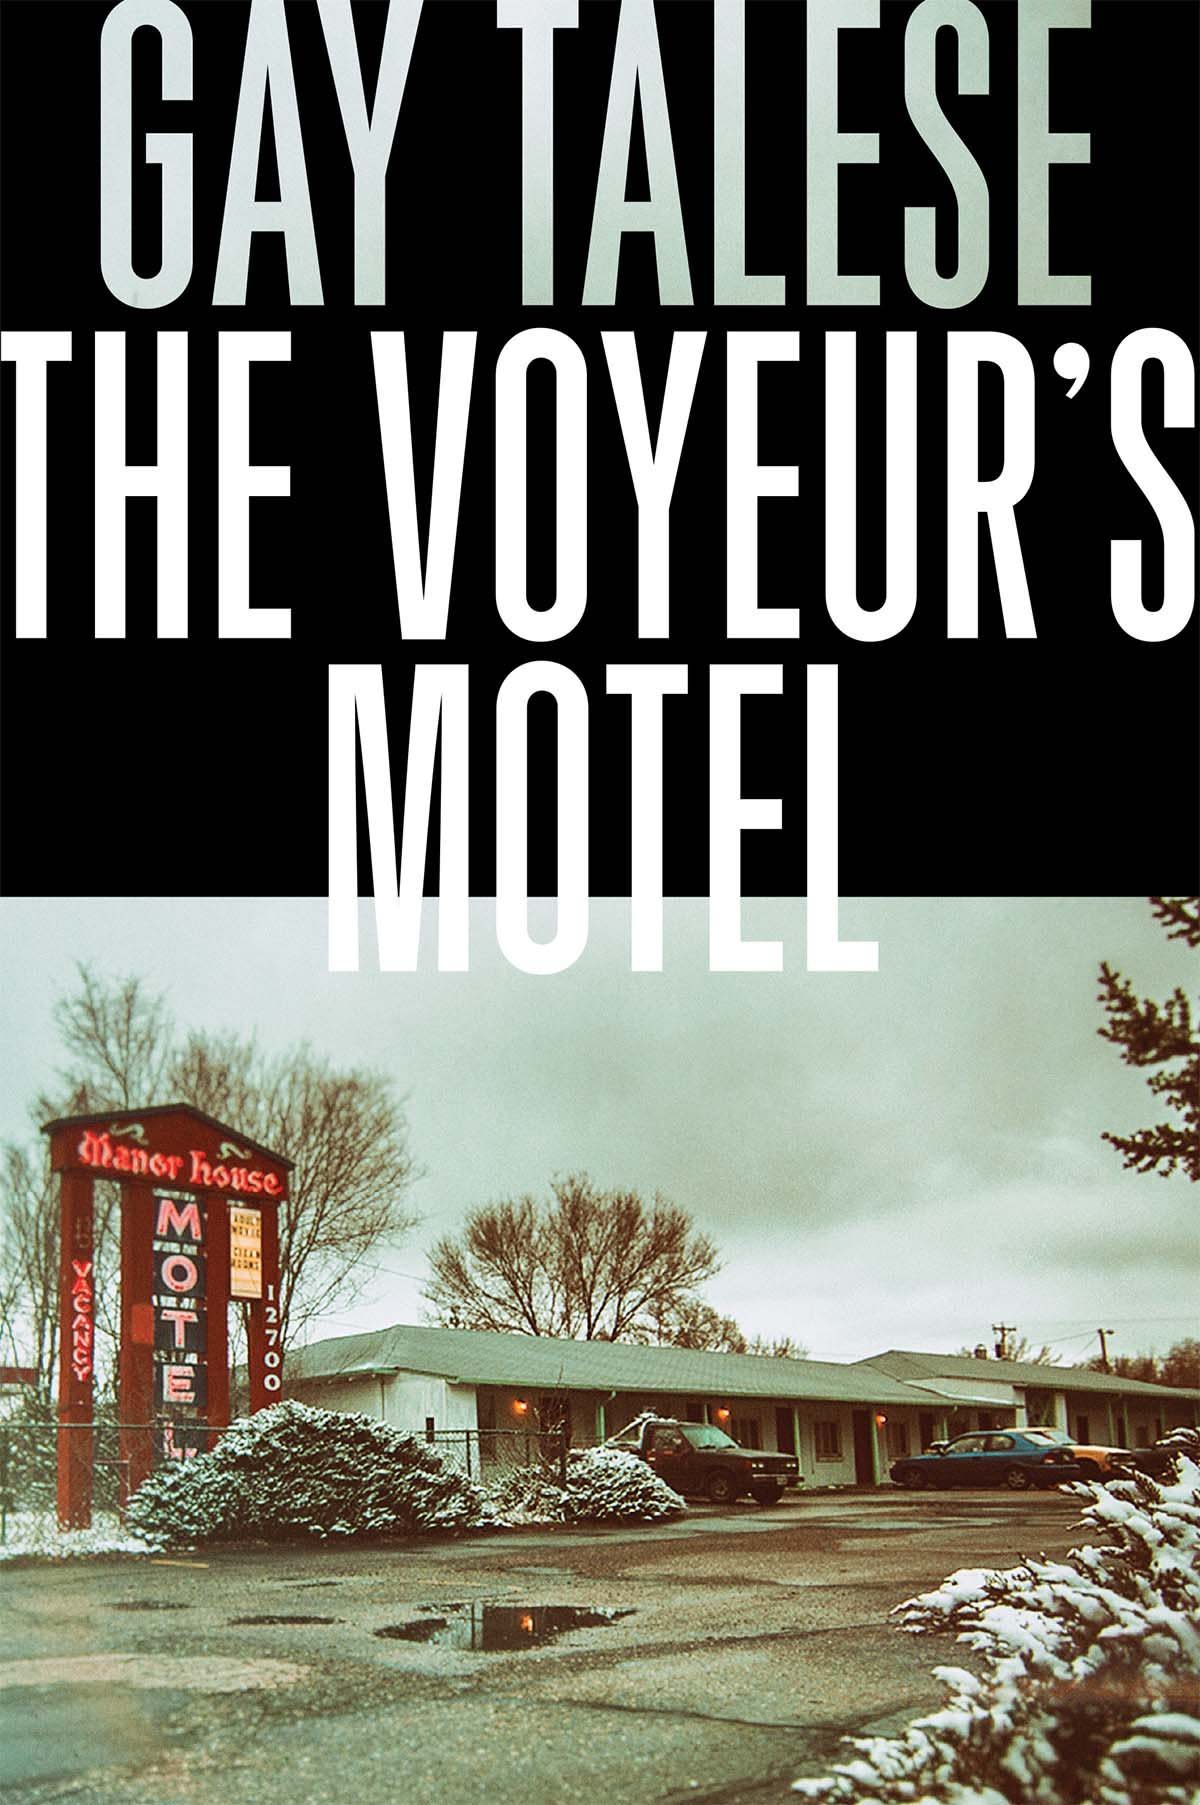 Author Gay Talese Flip-Flops On The Voyeurs Motel And Now Stands By Book While Filmmakers Try To Figure Out Next Steps picture